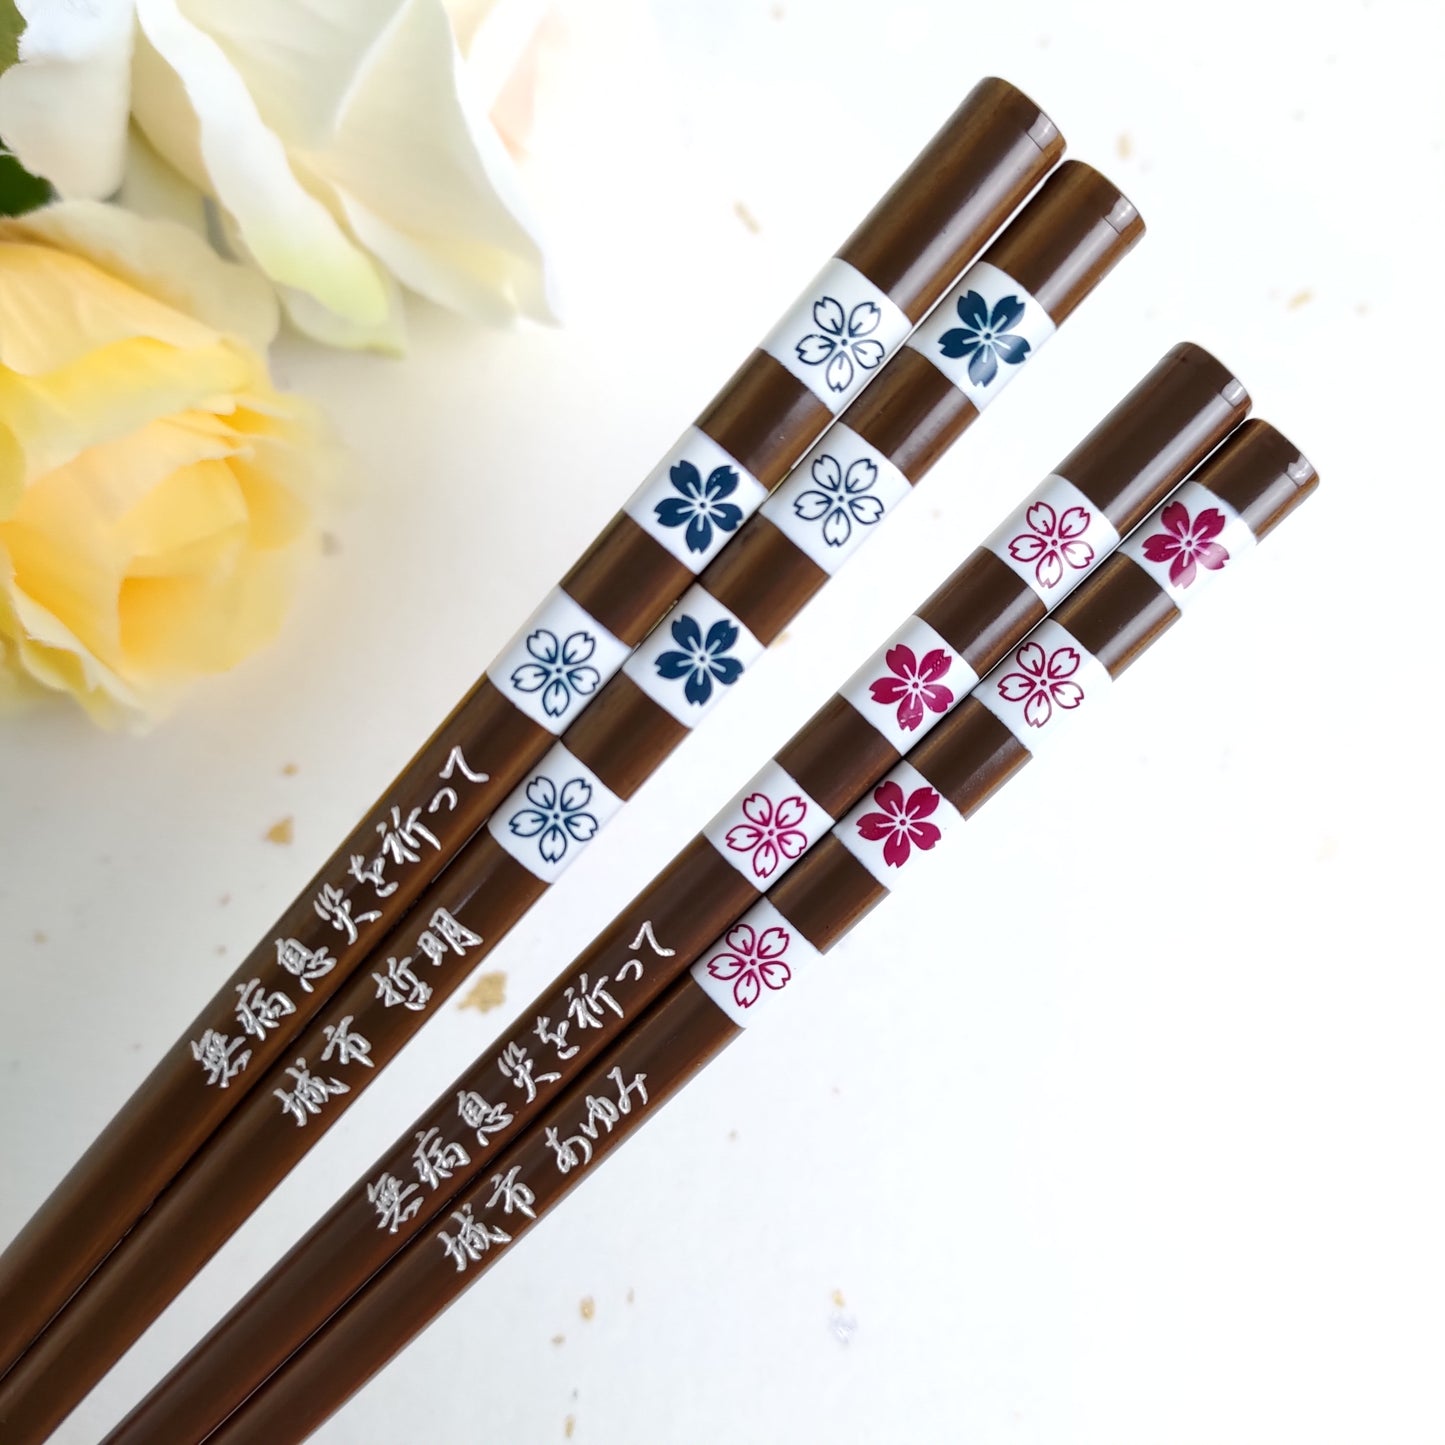 Square Cherry blossom magnetism Japanese chopsticks blue pink - DOUBLE PAIR WITH ENGRAVED WOODEN BOX SET